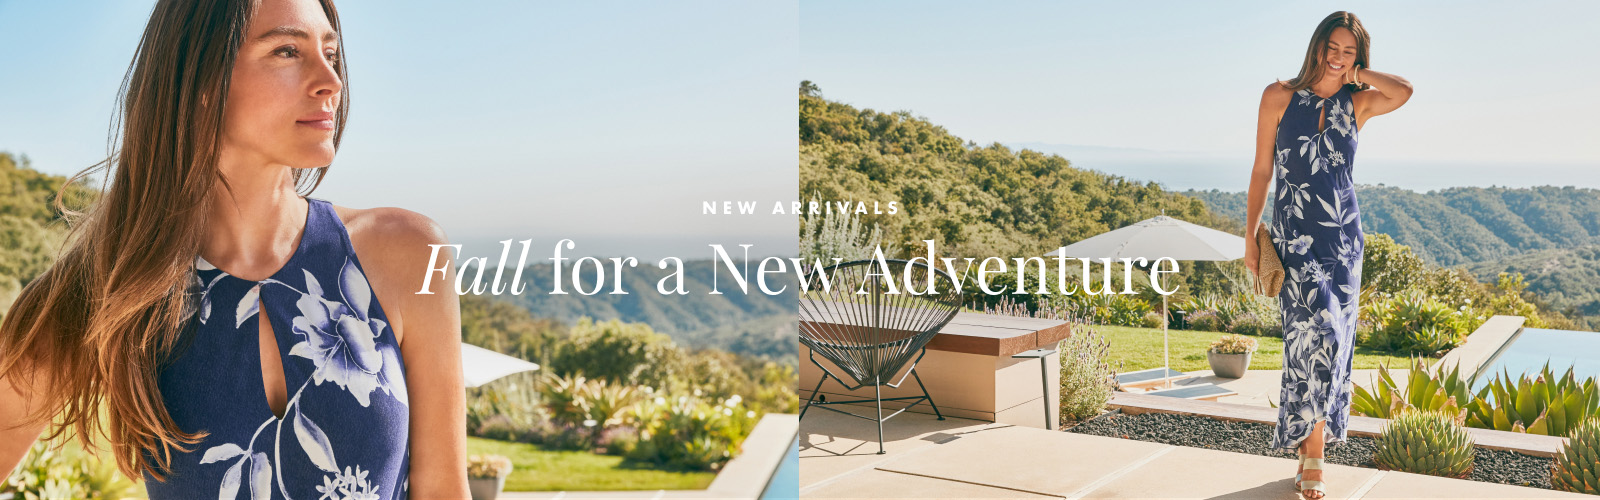 New Arrivals: Fall for a New Adventure